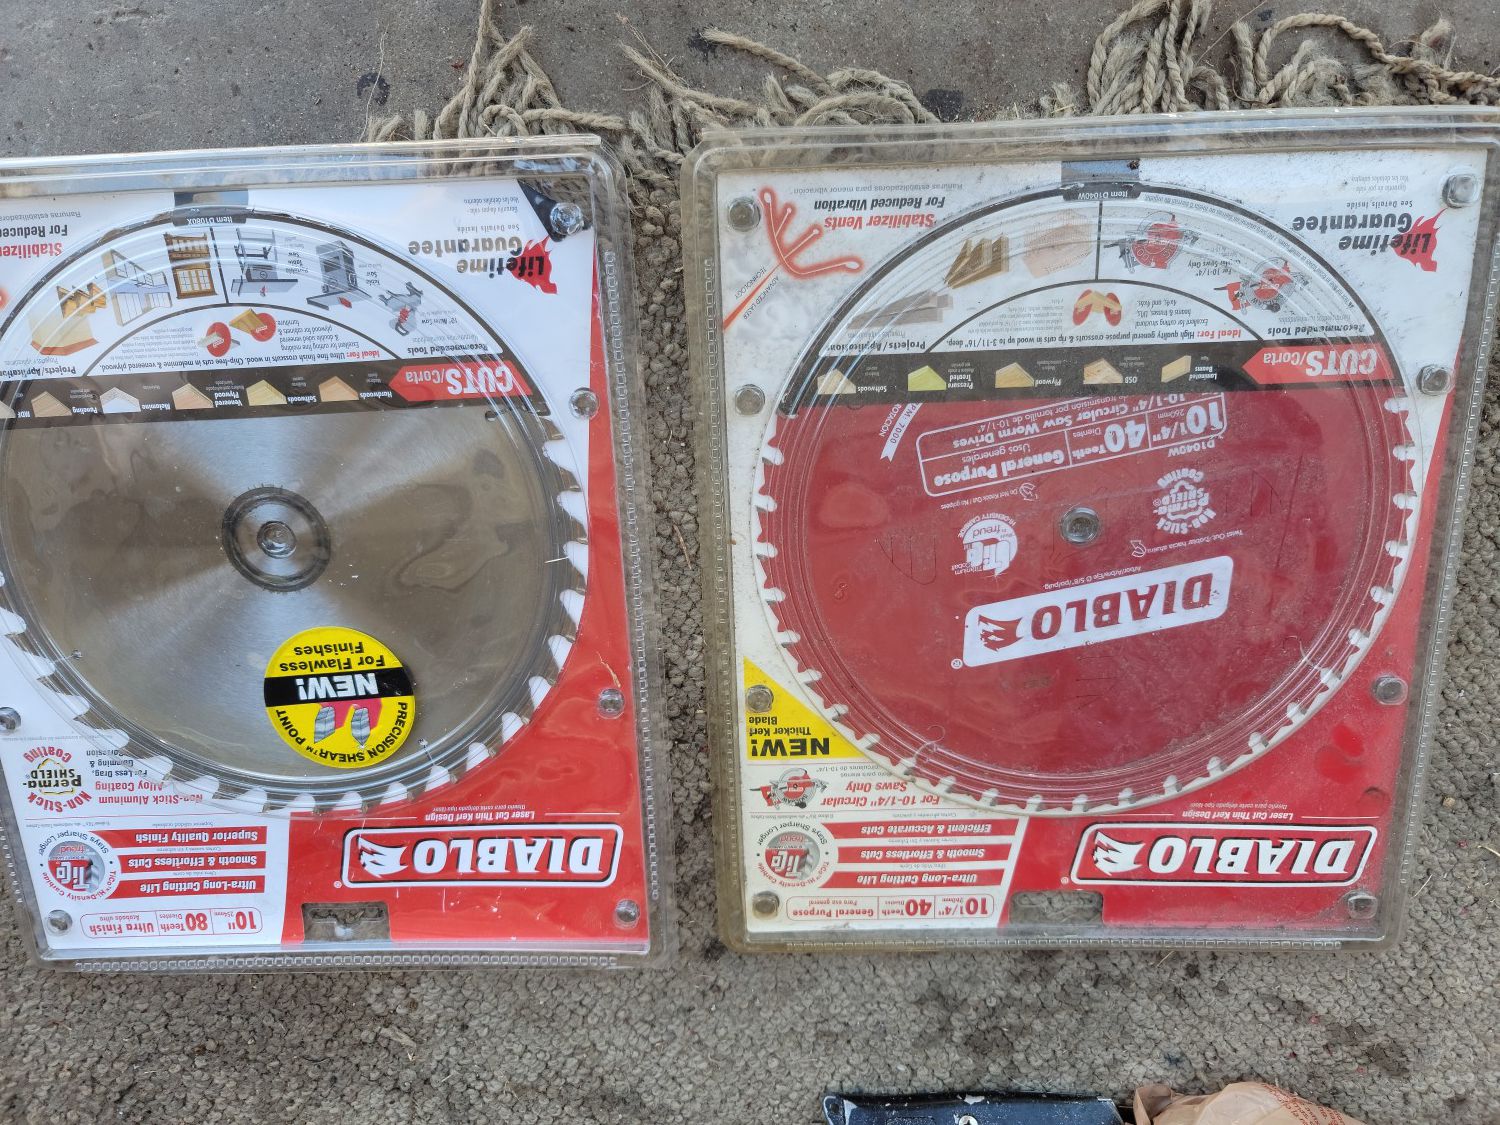 10" table saw blade and 10 1/4" skill saw blades